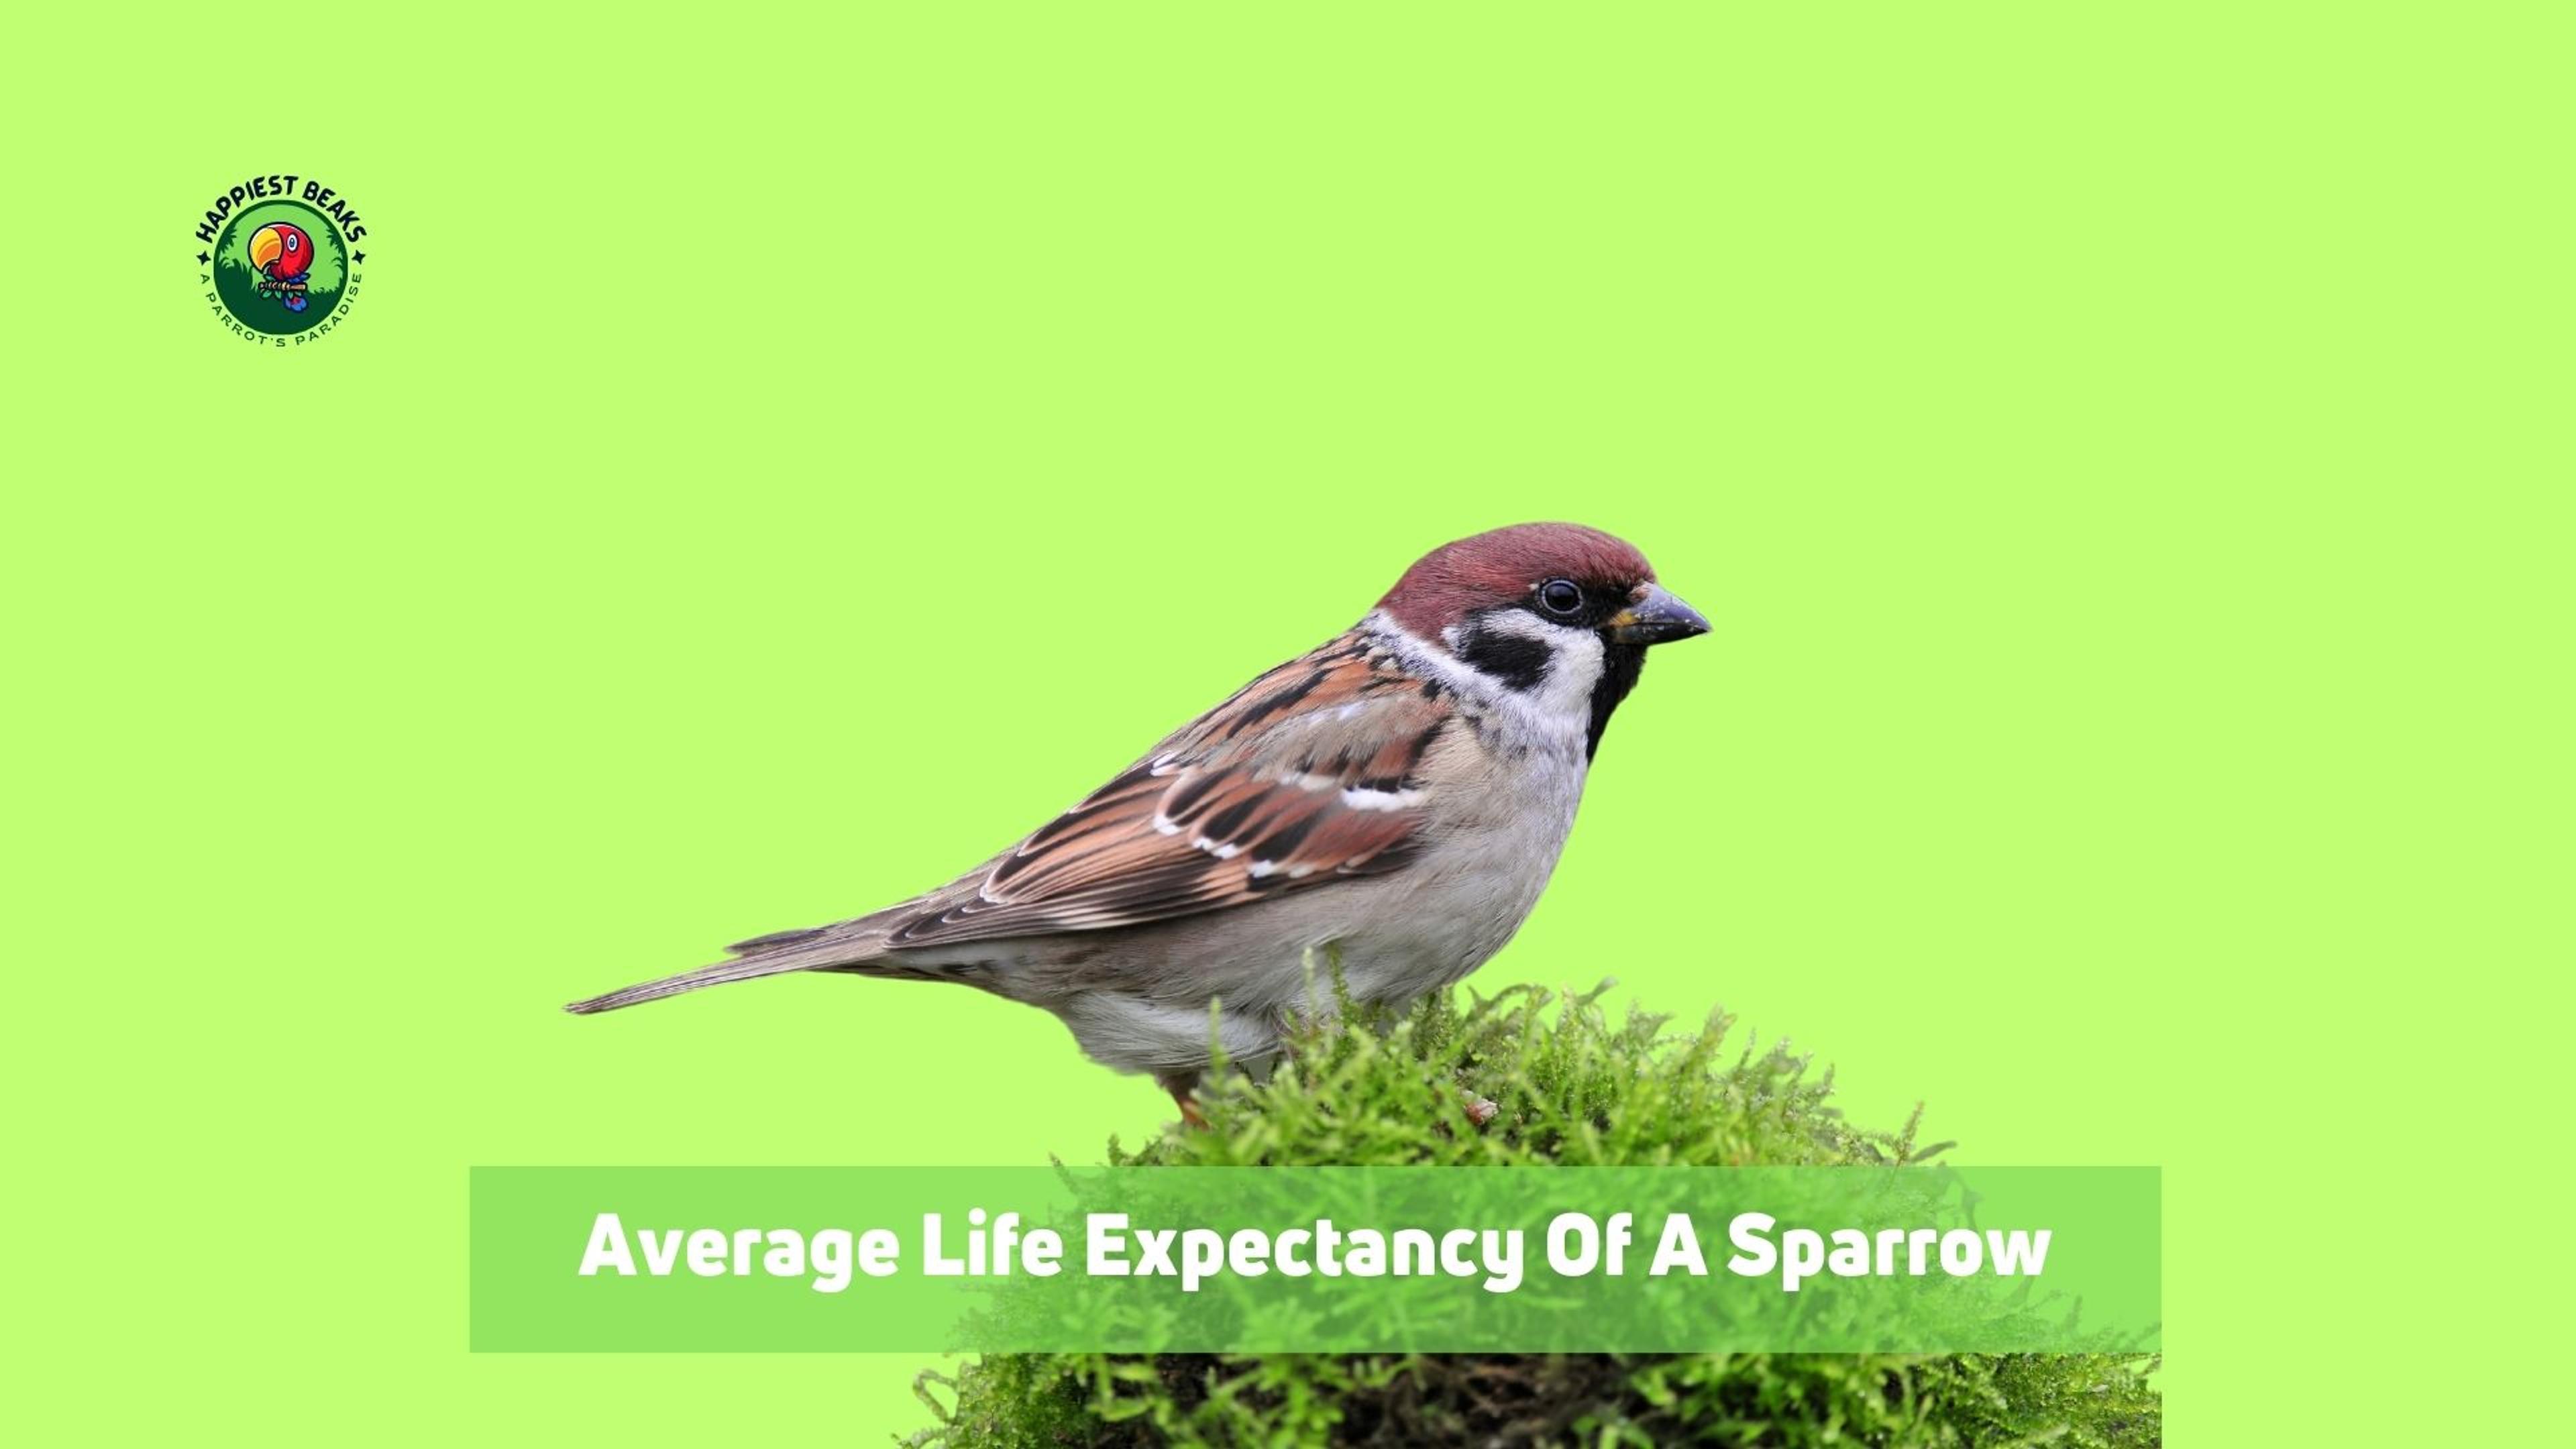 Average Life Expectancy of a Sparrow